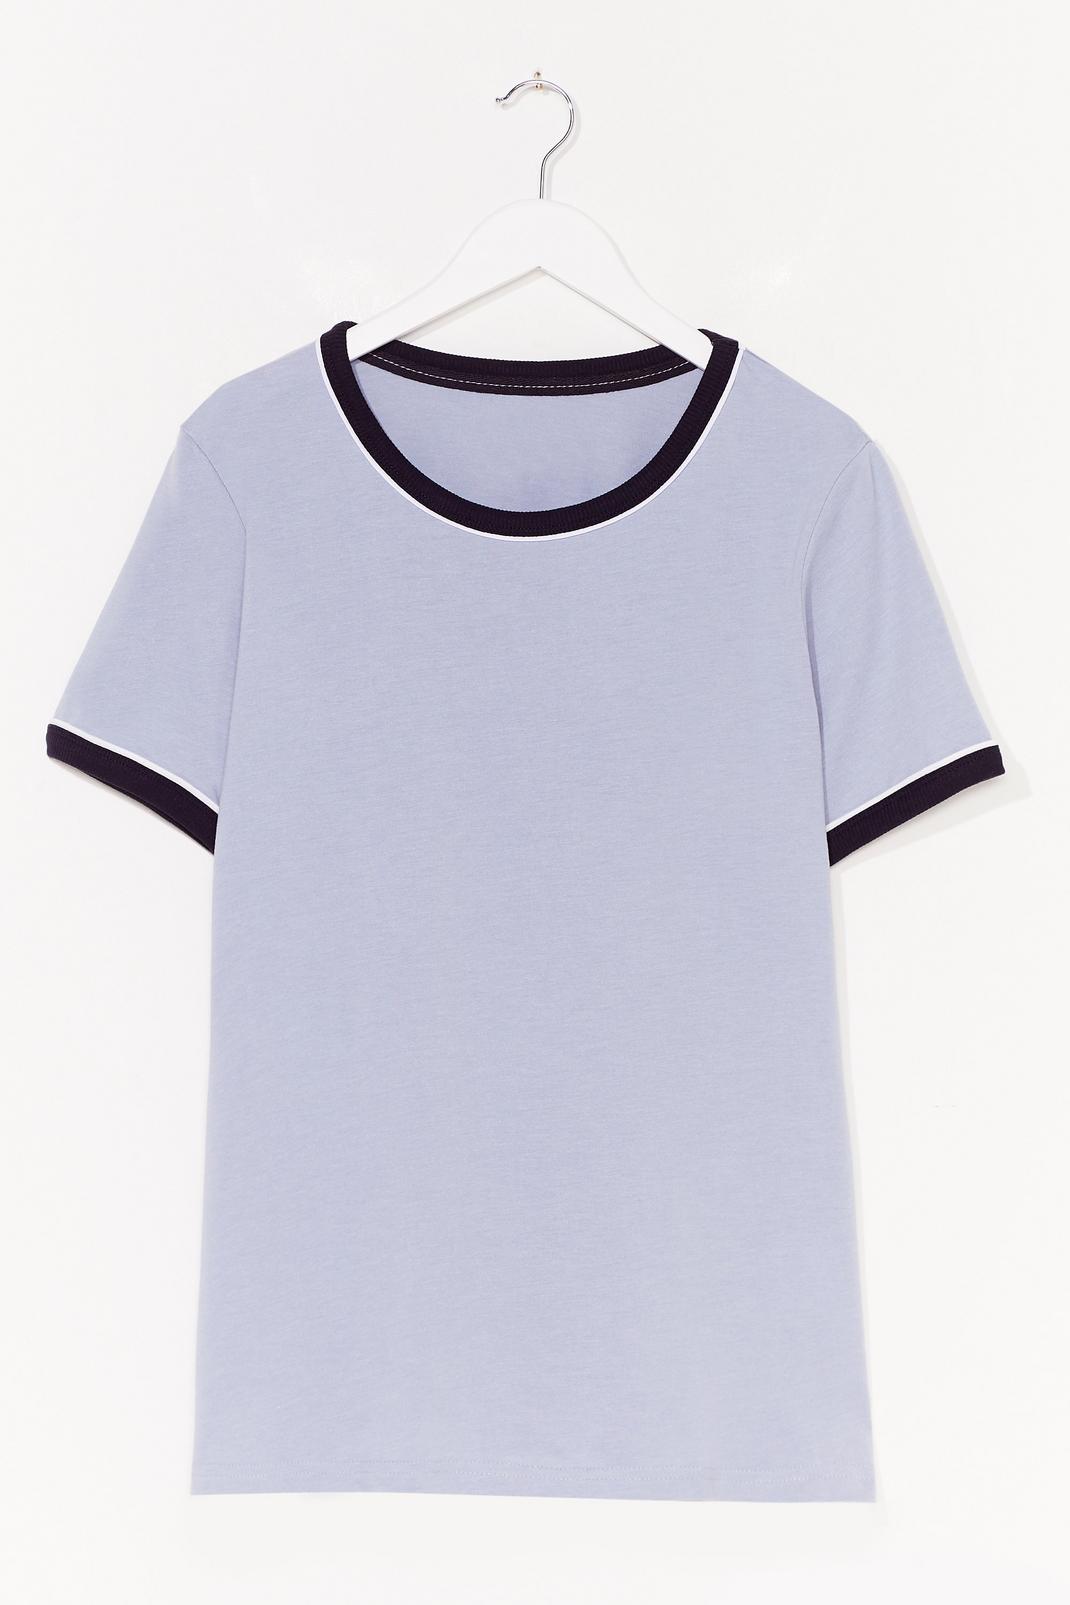 Ringer You Up Plus Contrast Tee image number 1